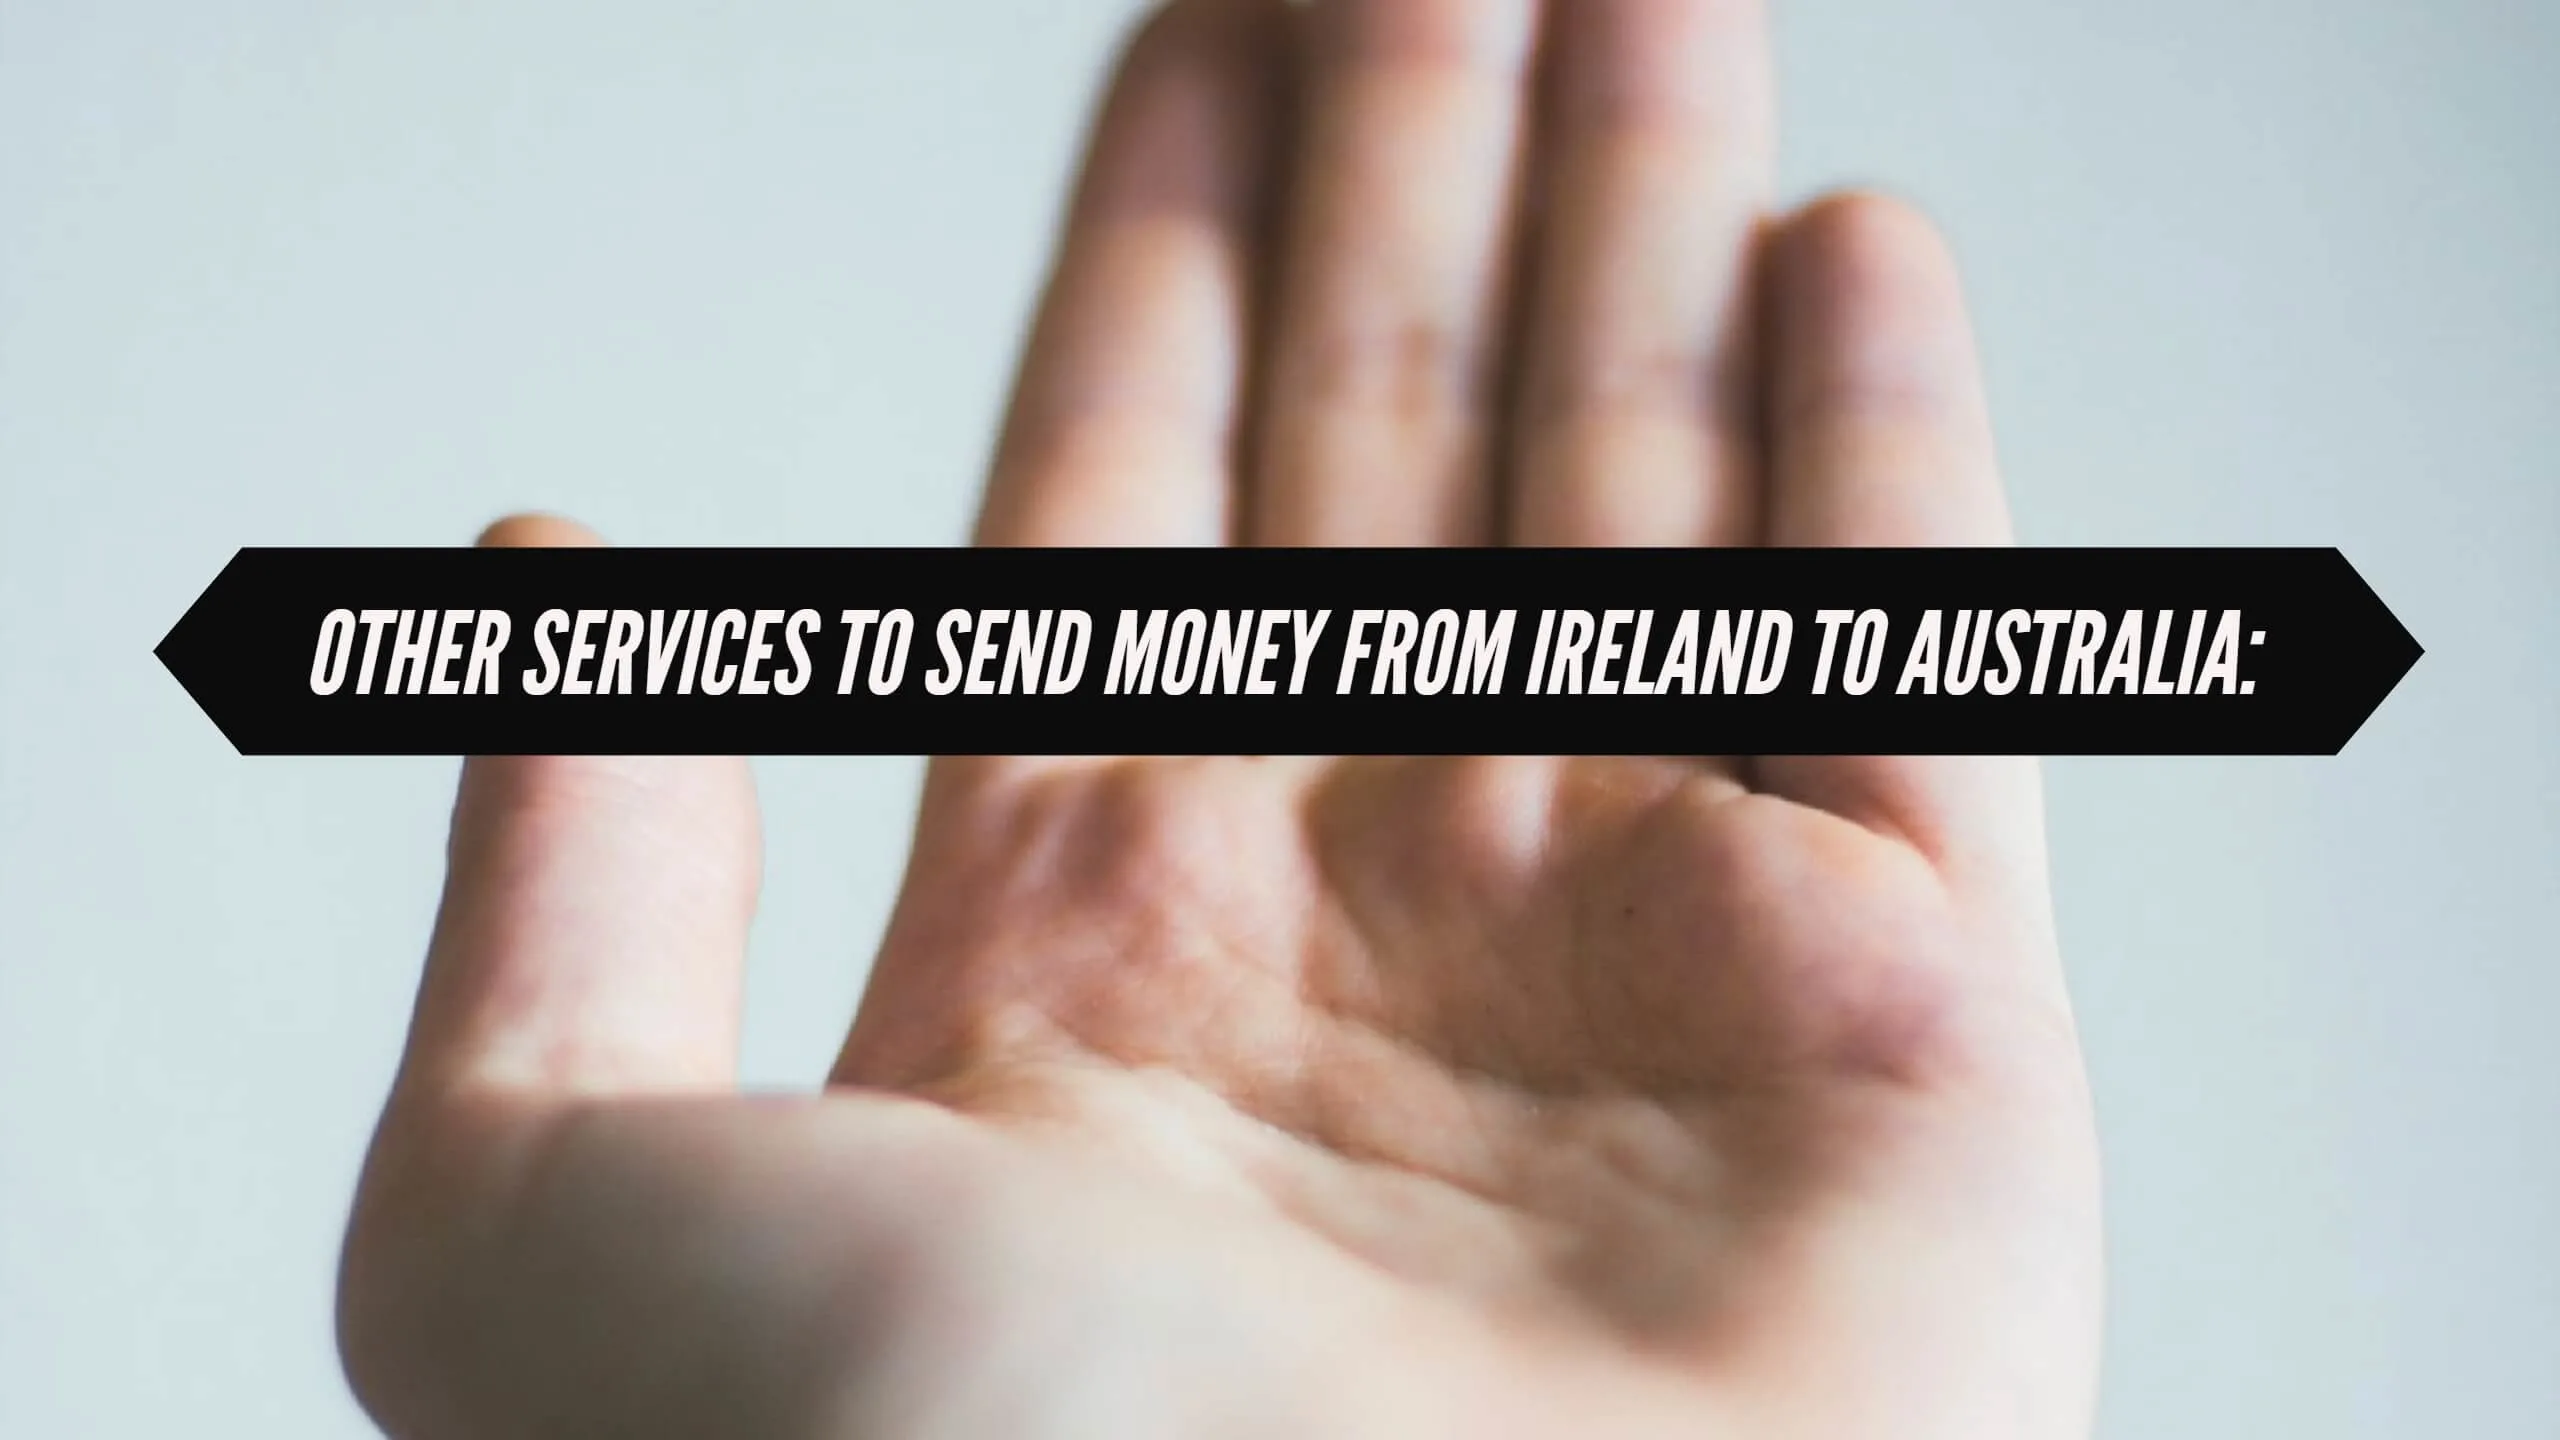 Other services to send money from Ireland to Australia.